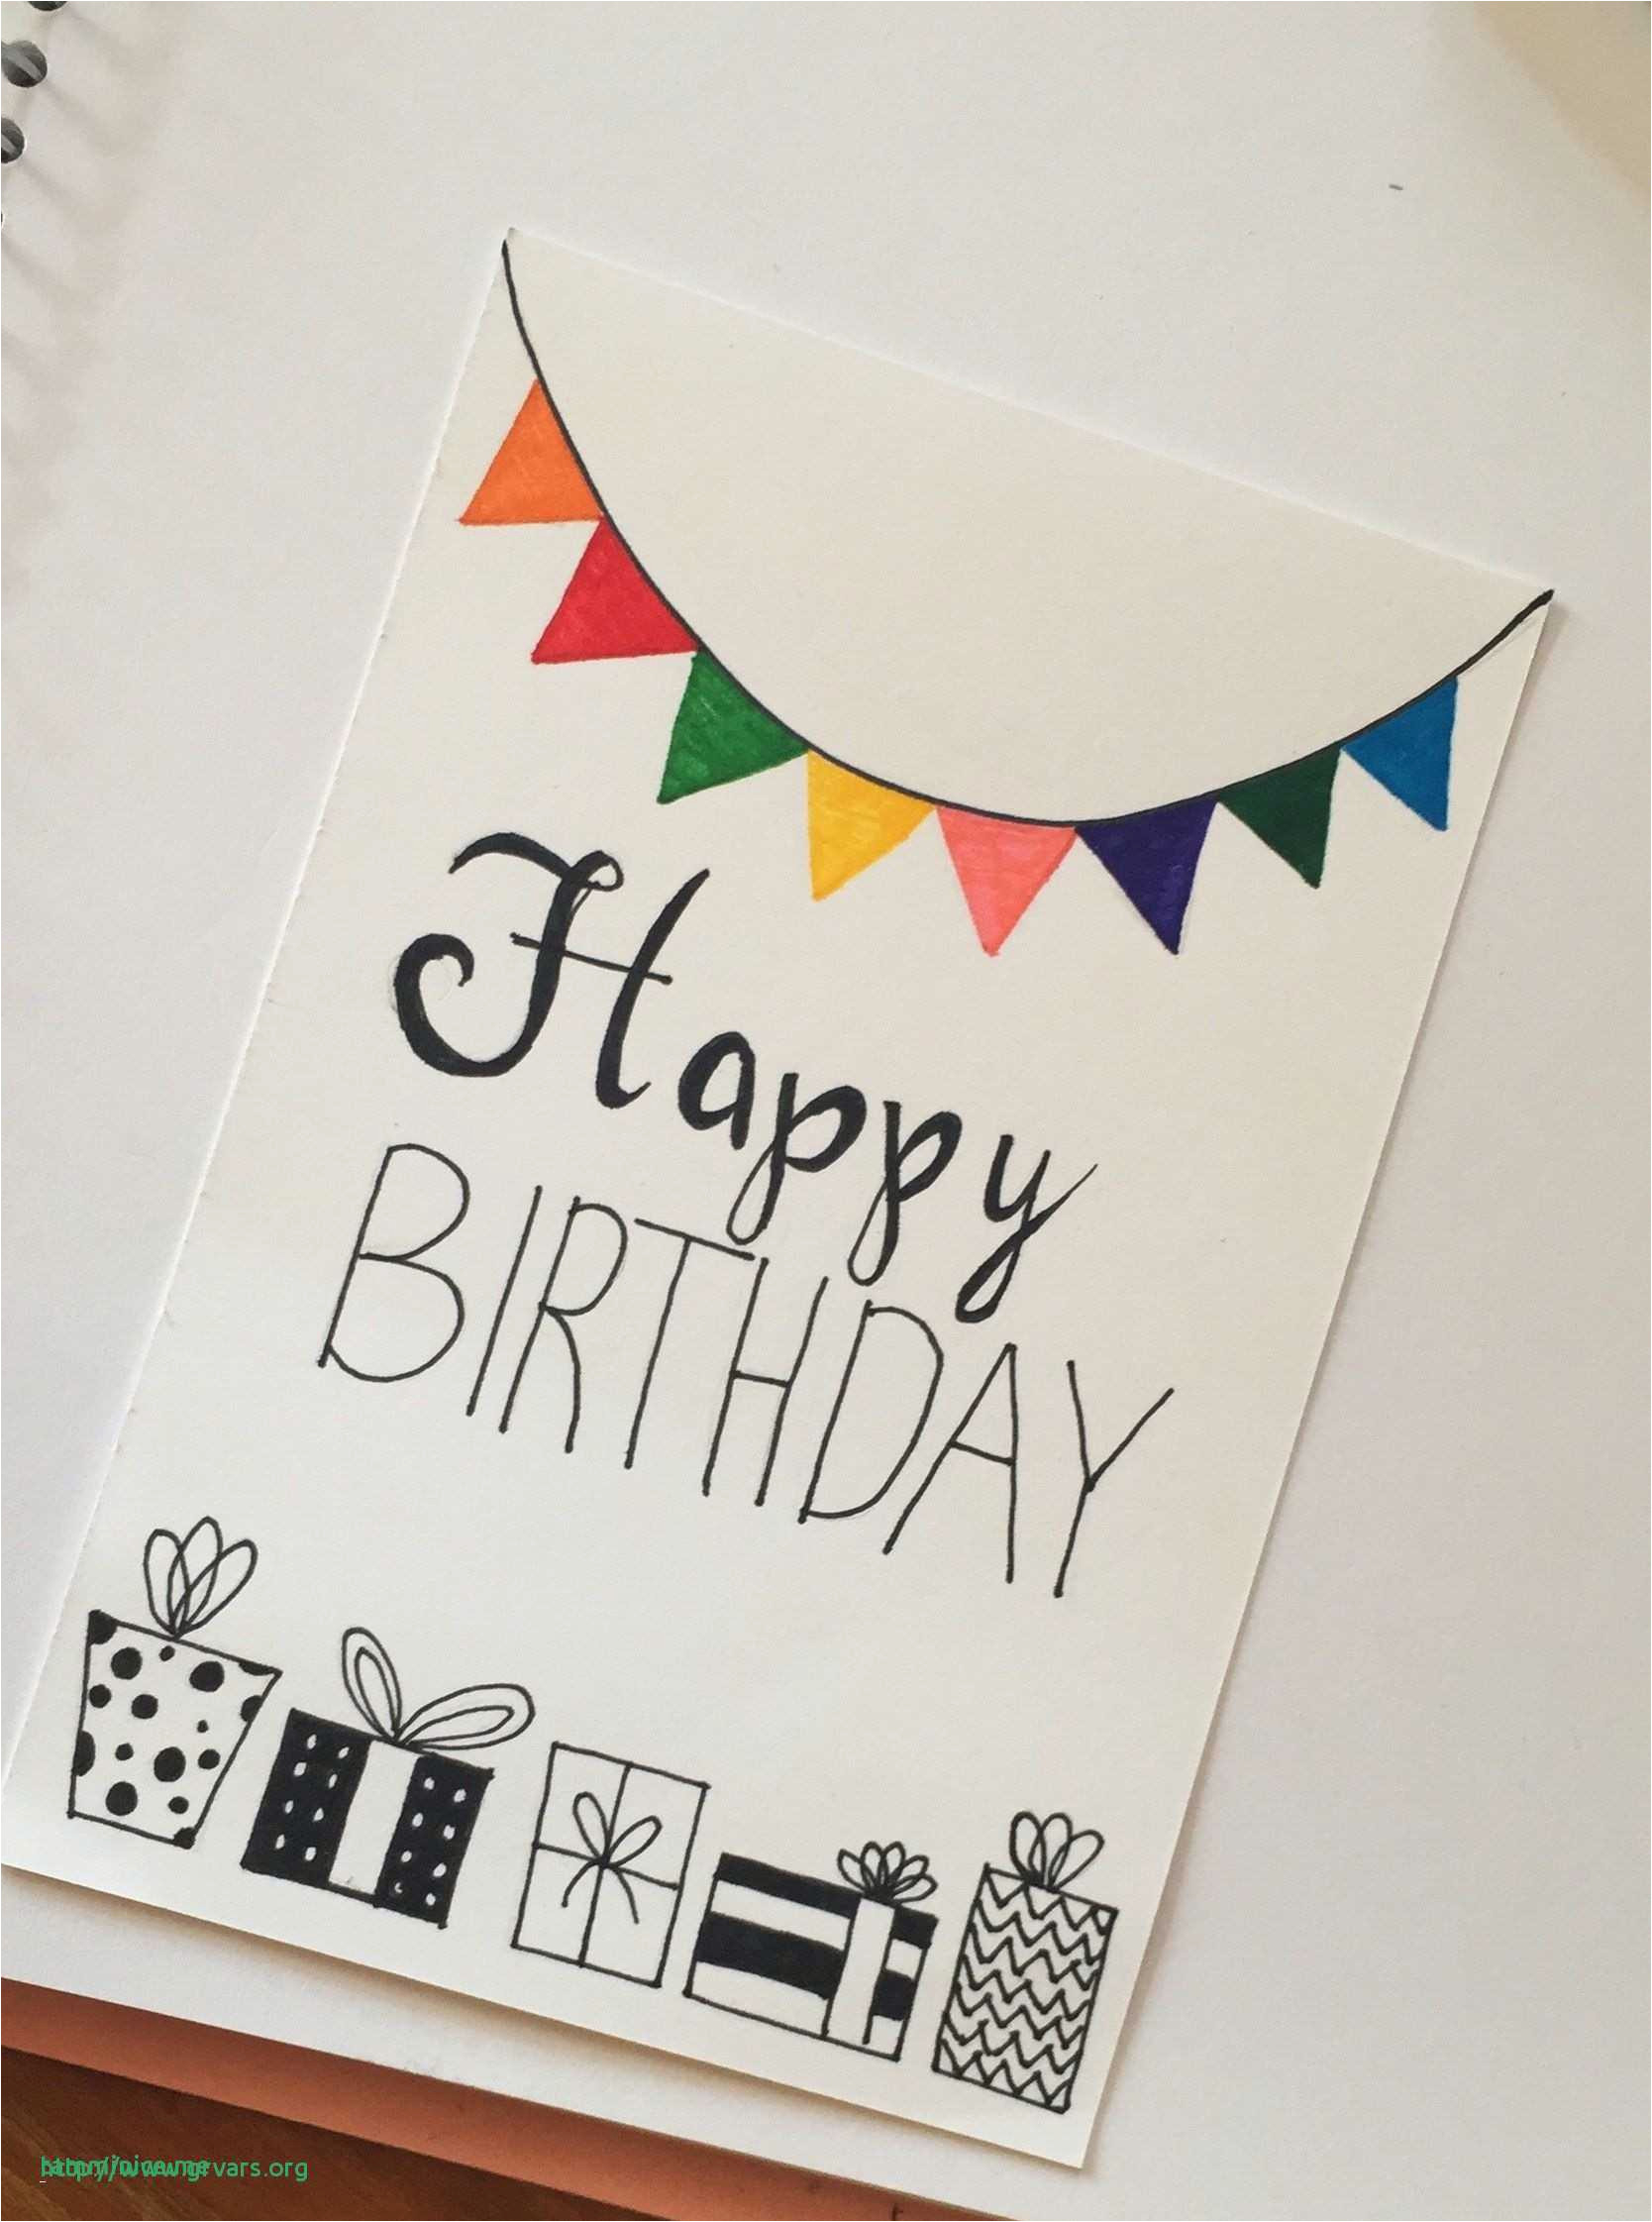 Ideas To Make A Birthday Card For A Best Friend How To Make Diy Birthday Cards For Best Friend Simple Handmade